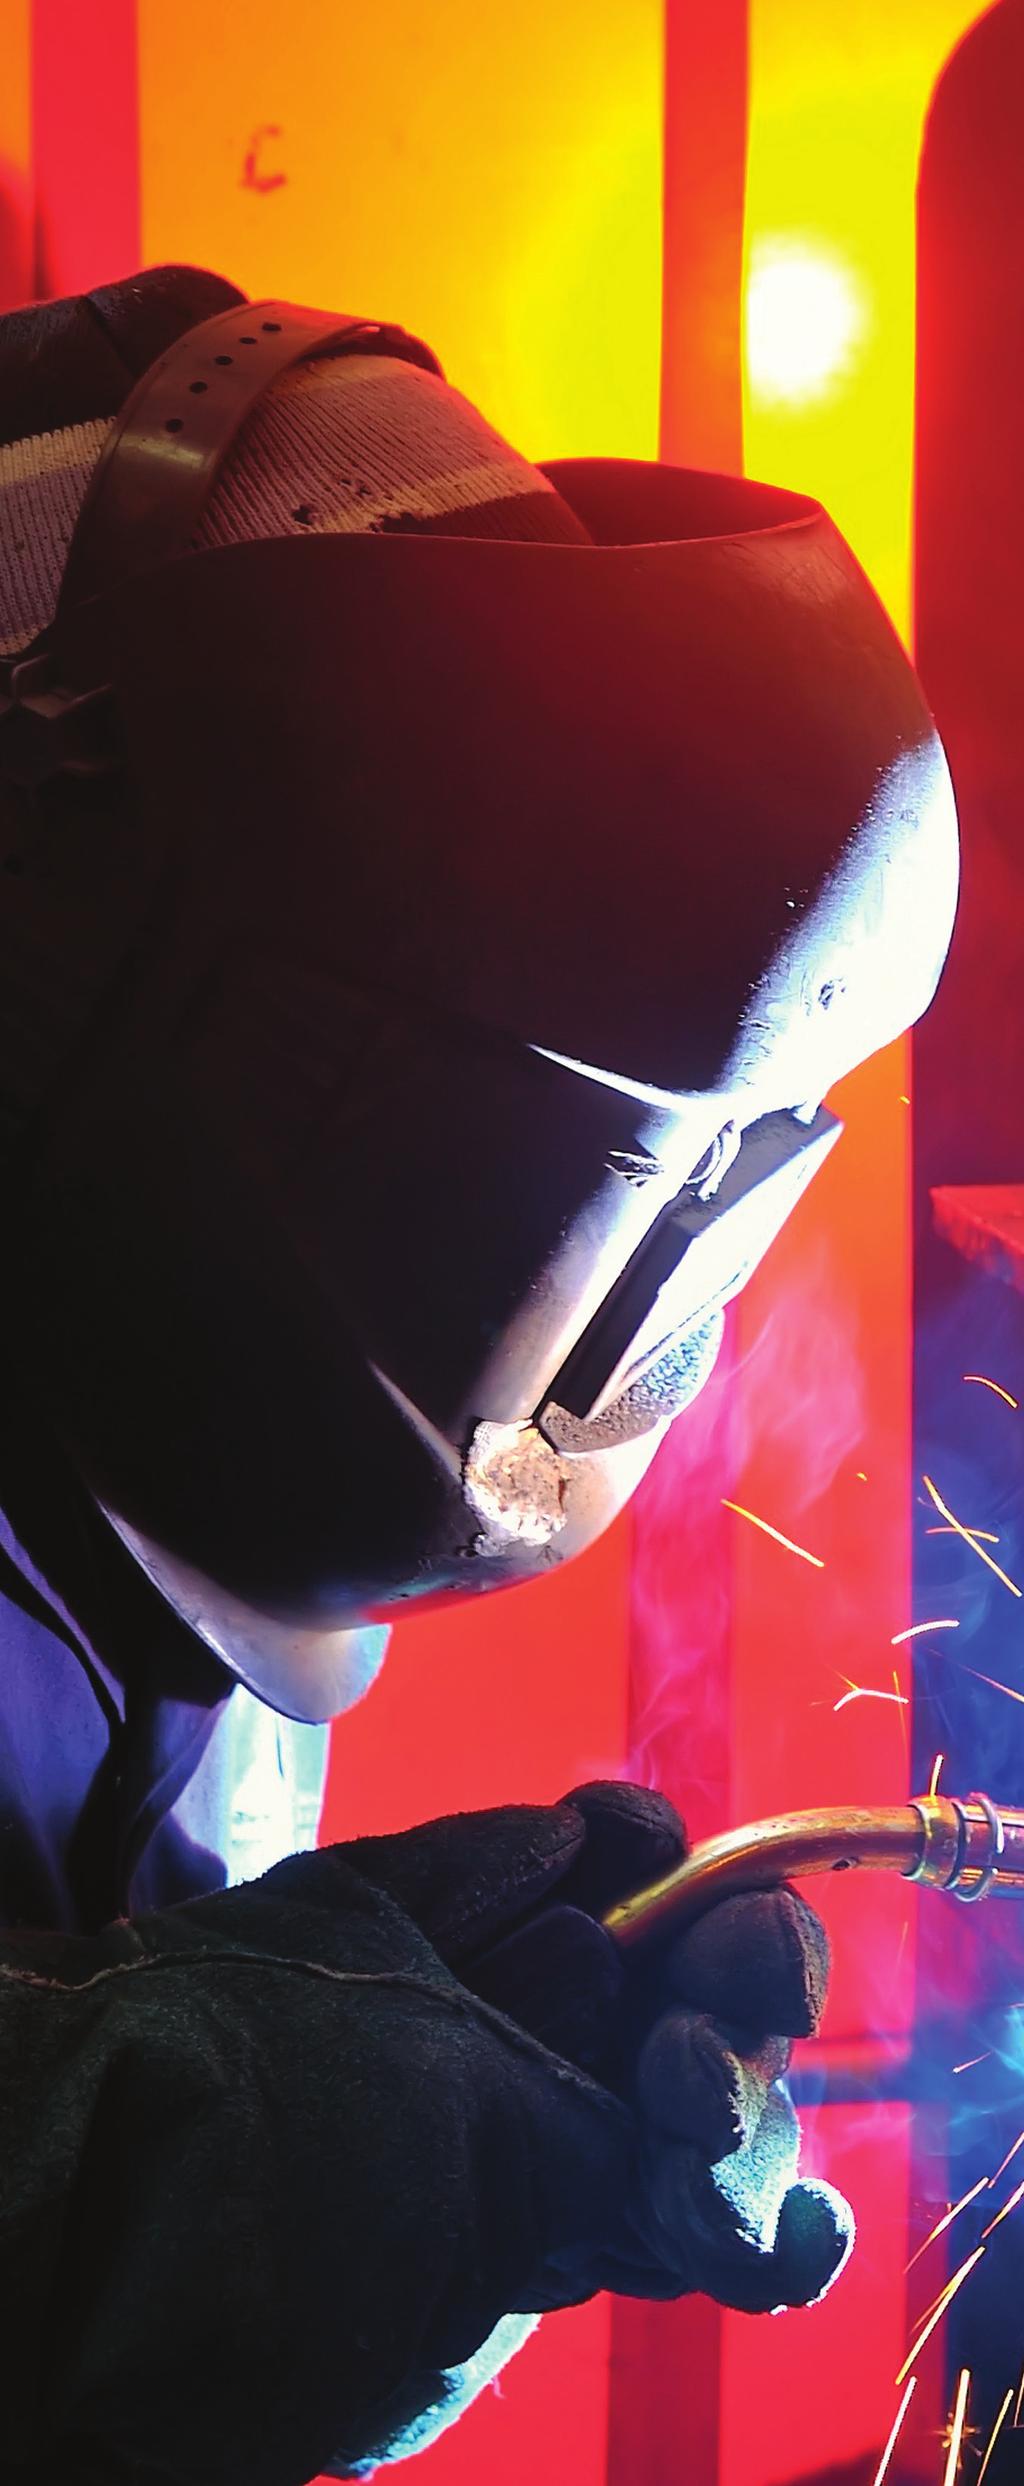 Stellite Alloys With over 100 years of proven performance, Kennametal s Stellite alloys have become known as the worldwide material solution in wear, heat and corrosion applications.